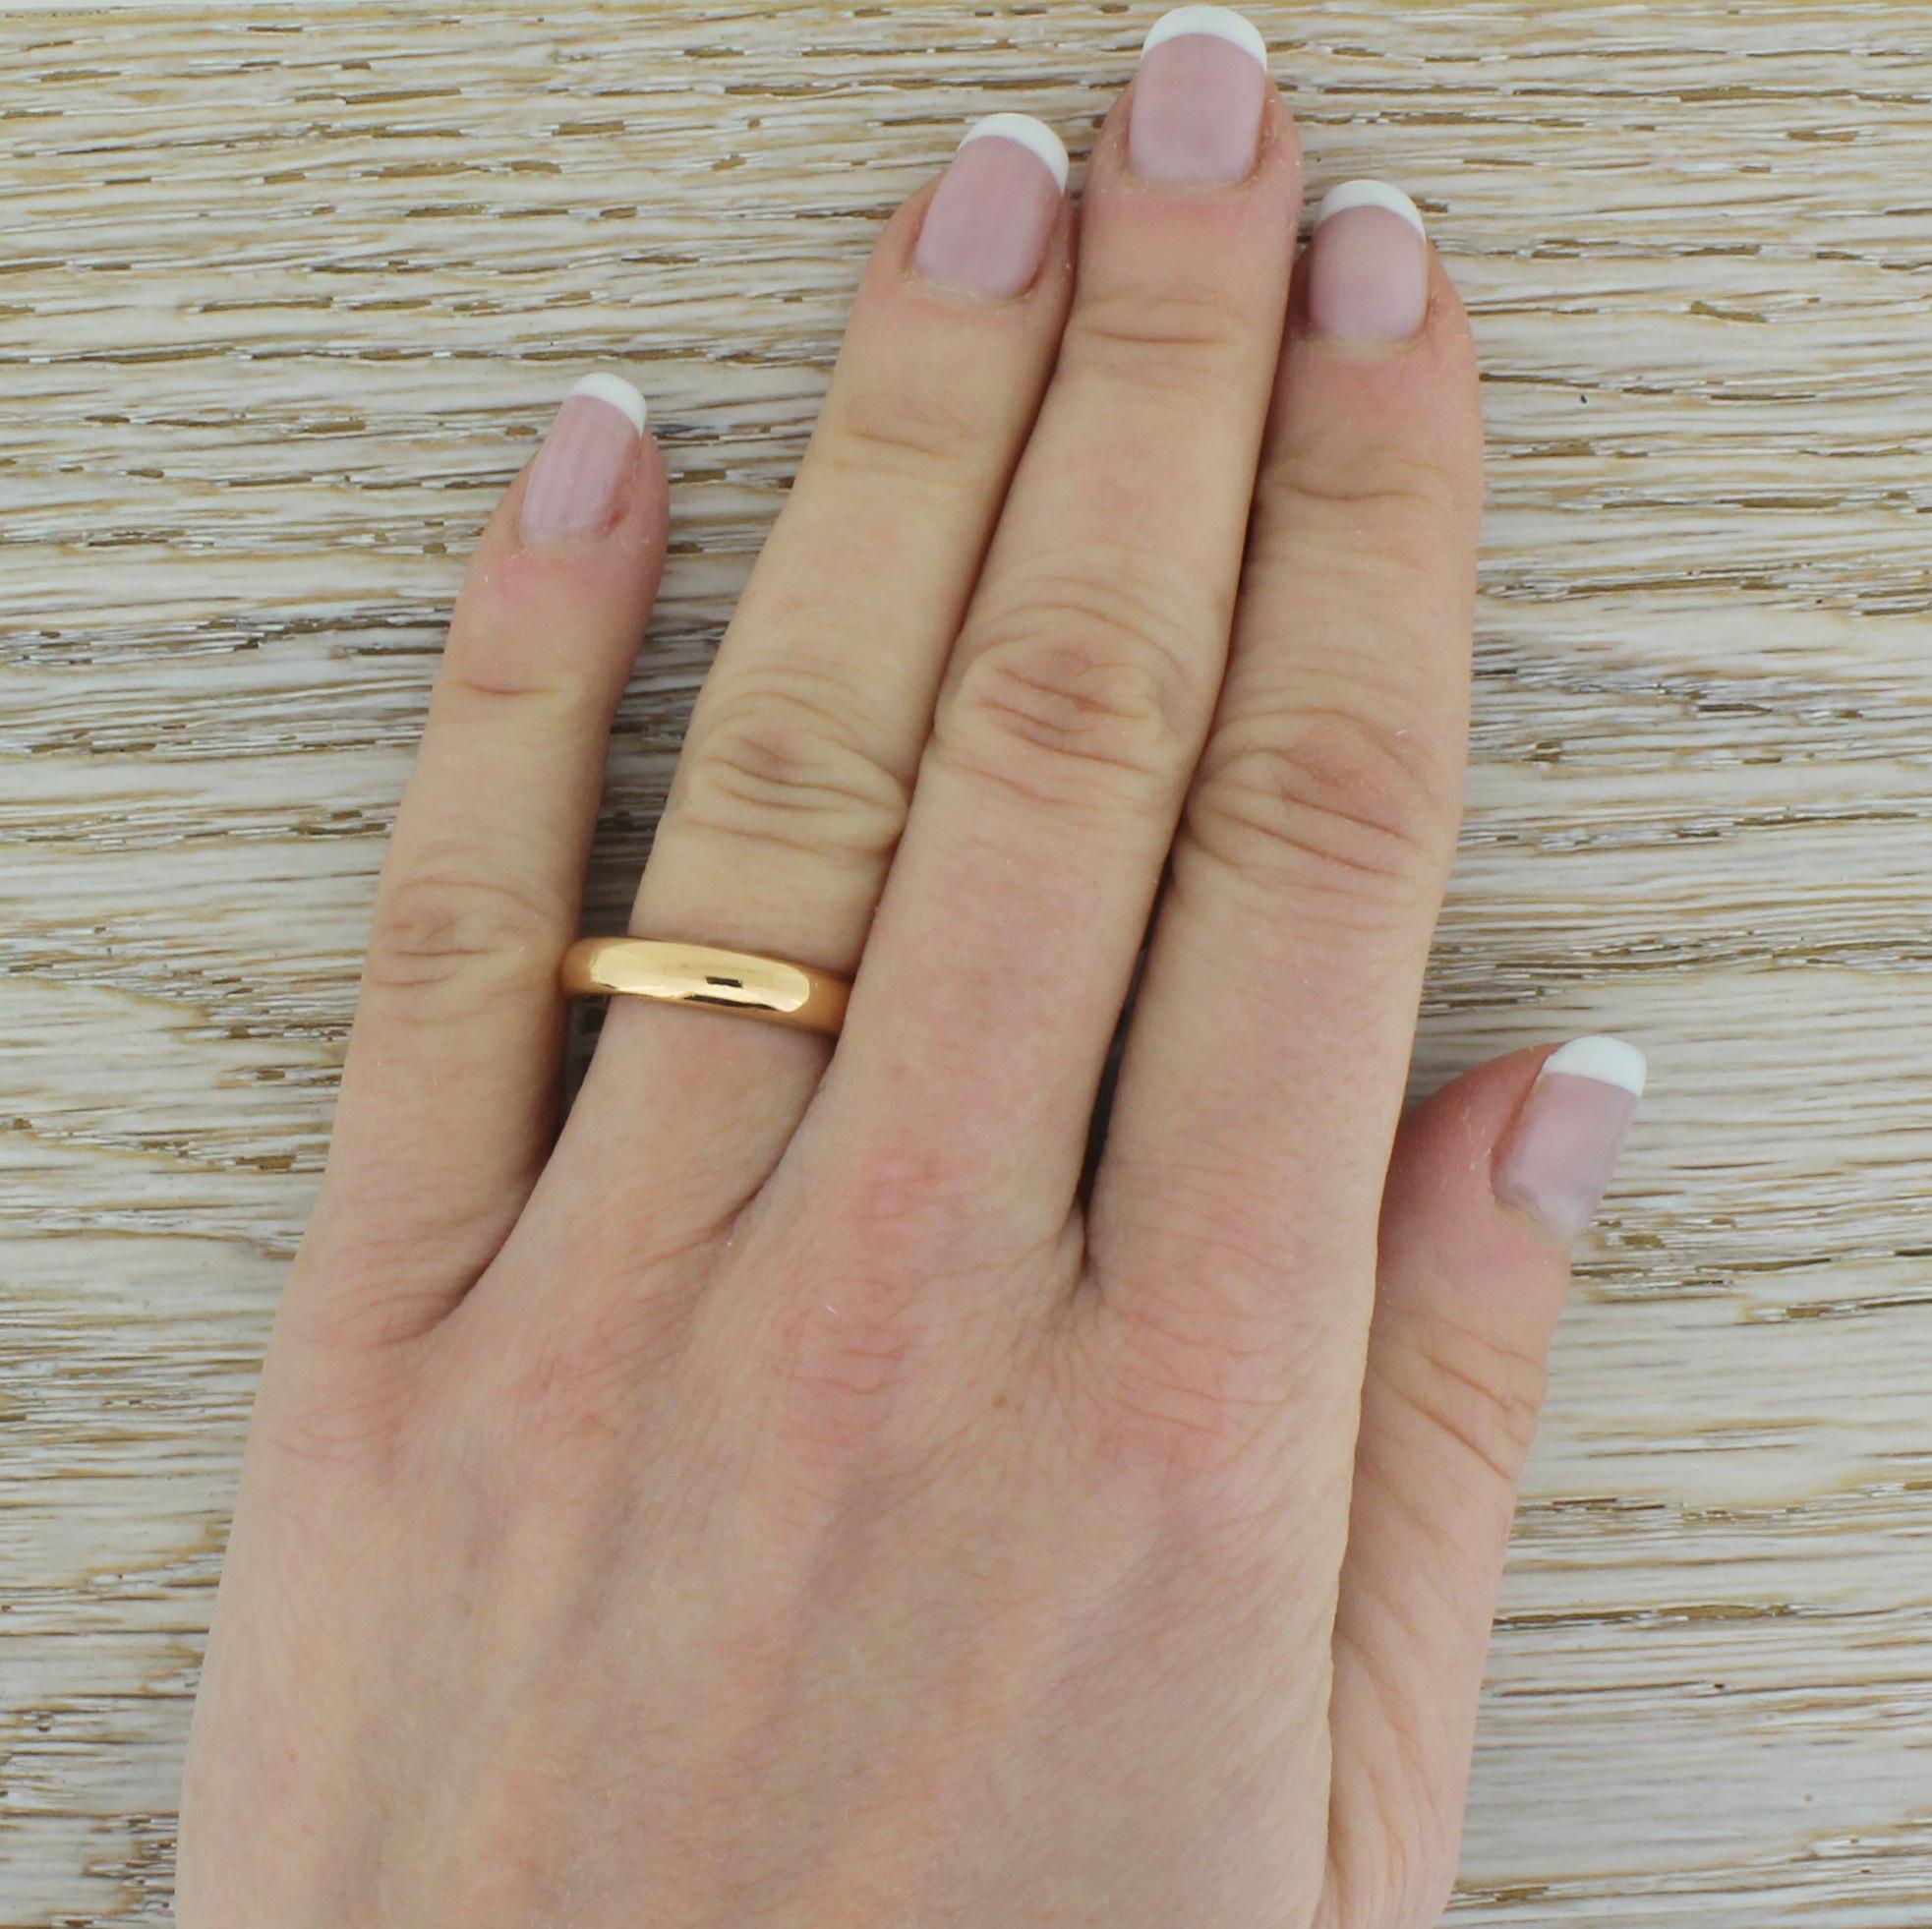 A stunning vintage rose gold wedding ring. A chunky, nicely heavy D-shaped 4mm band crafted in a warm rose gold. With clear internal hallmarks from the Birmingham Assay, 1929

Size – N 1/2 (UK) or 6.75 (US). Complimentary sizing is available, can go